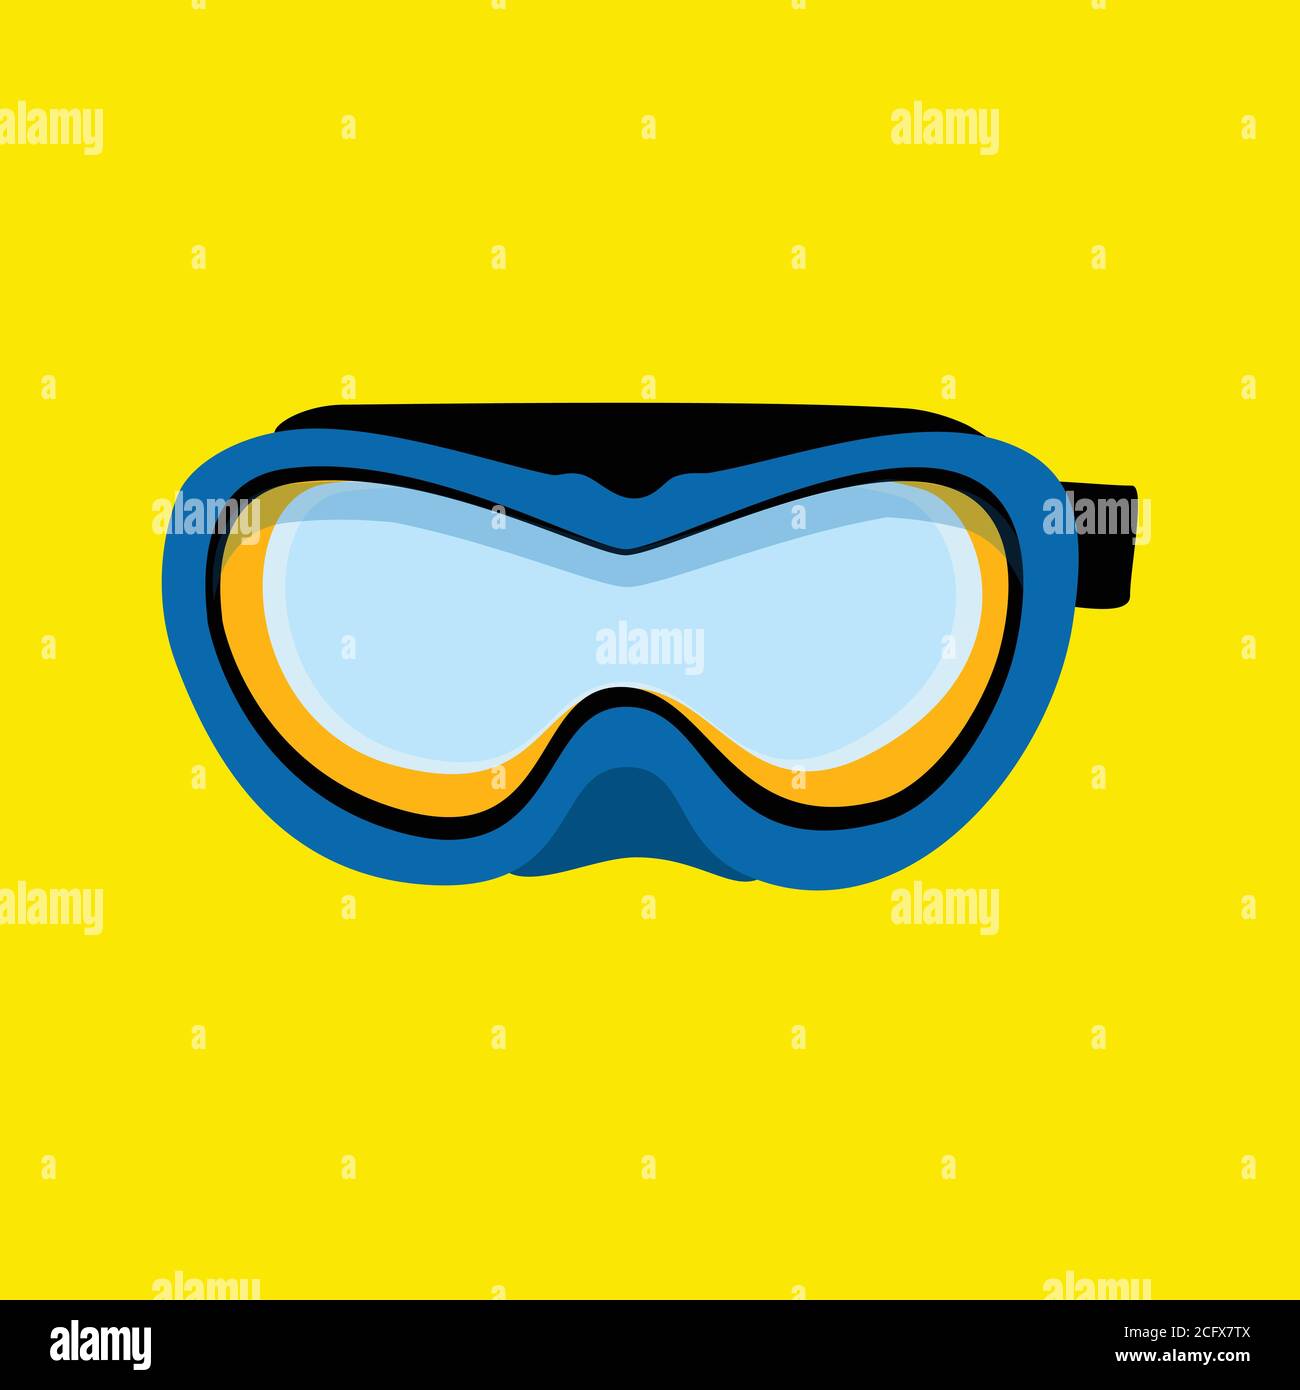 Blue diving mask. Diving mask isolated on yellow background. Swimming equipment Stock Vector